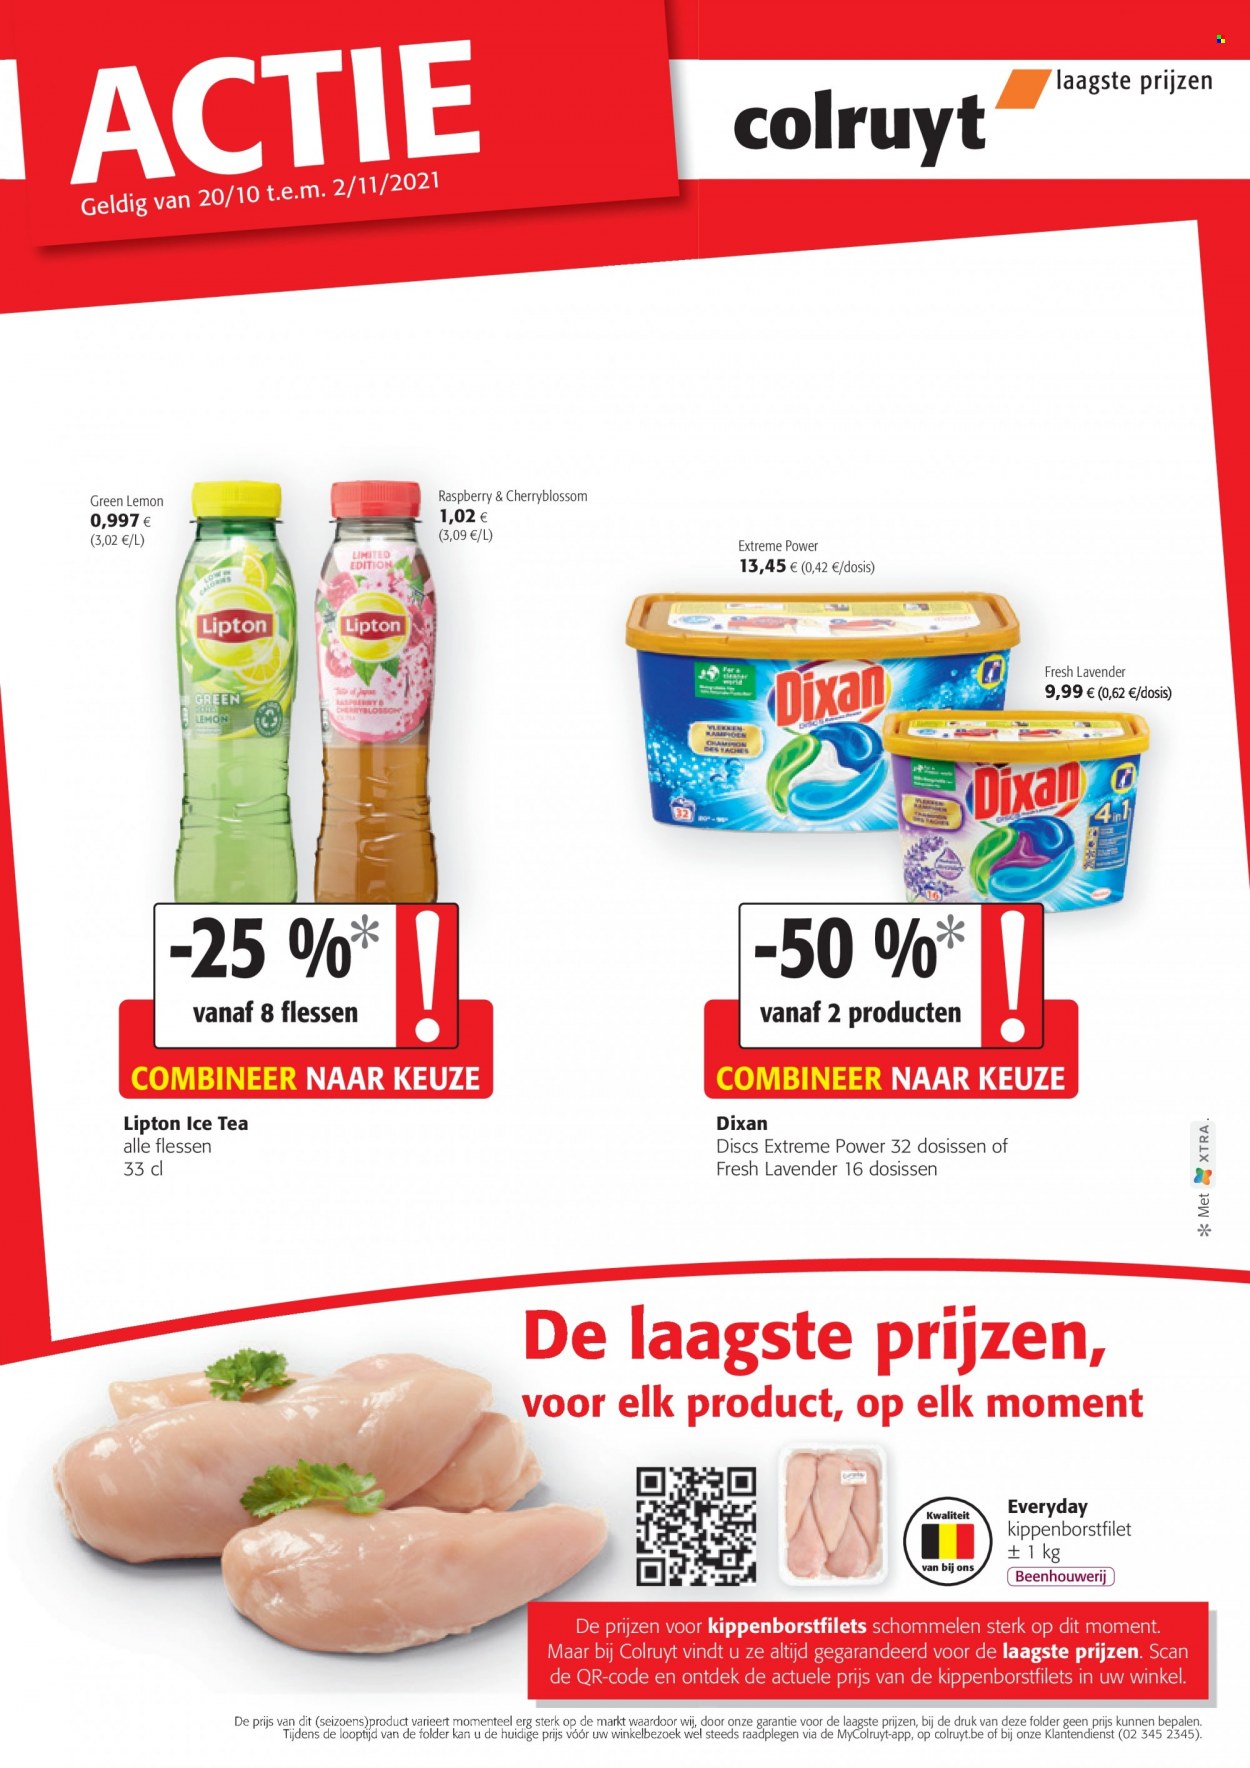 Catalogue Colruyt - 20.10.2021 - 2.11.2021. Page 1.